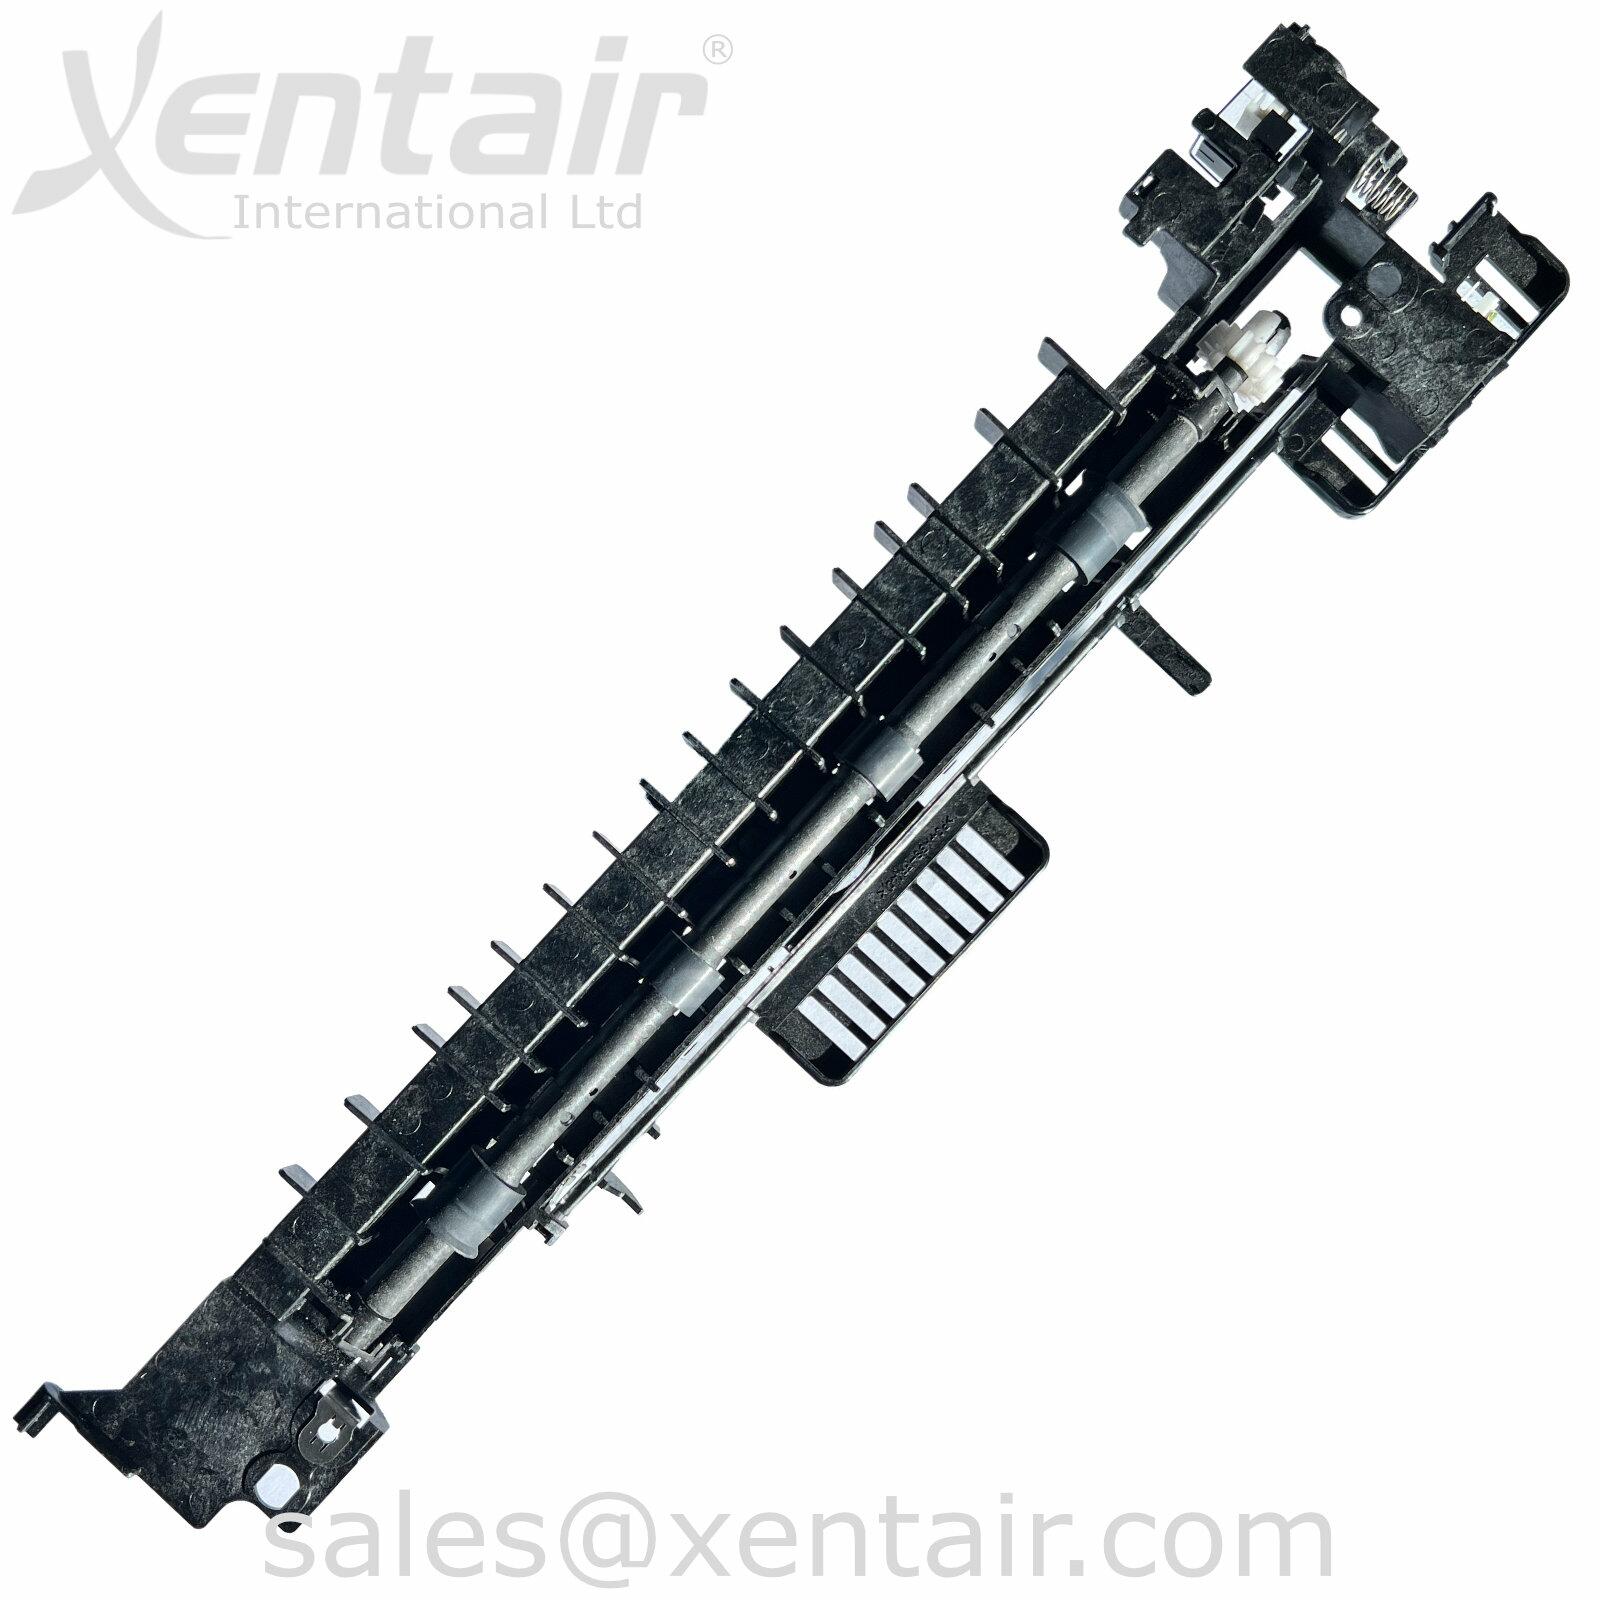 Xerox® WorkCentre™ 3315 3320 3325 Exit Chute Assembly 054K48381 54K48381